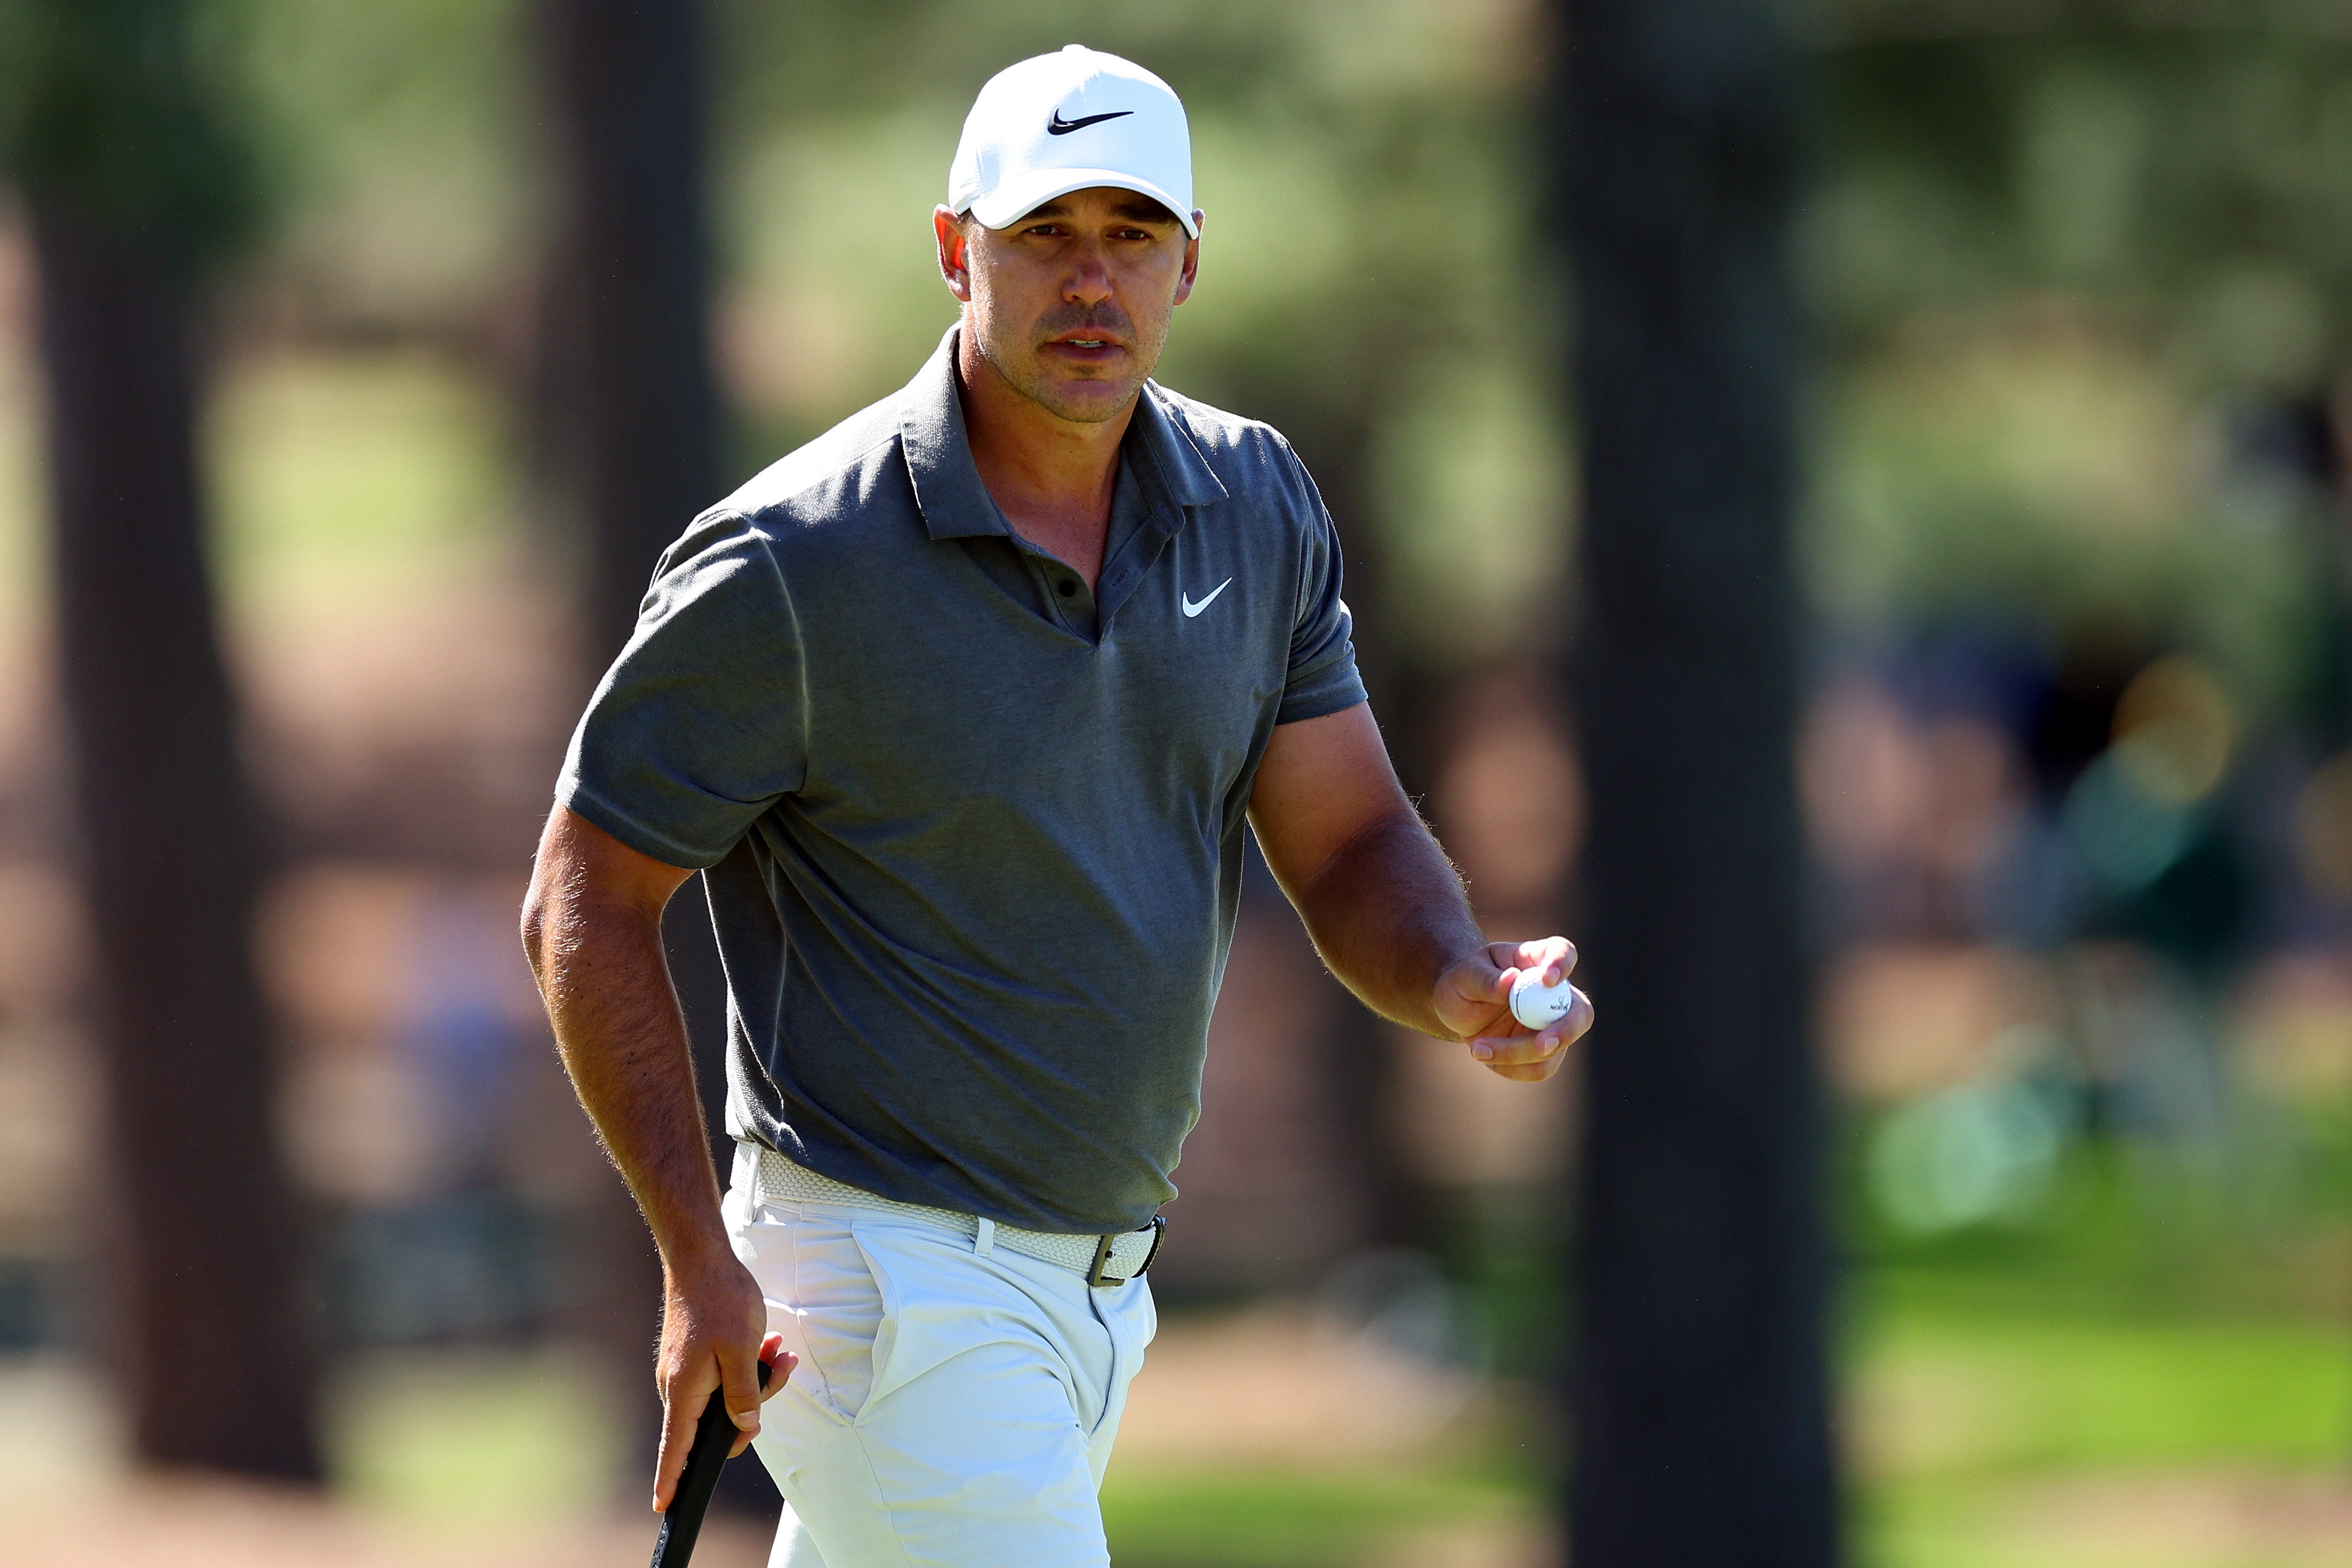 Brooks Koepka was not impressed with the slow play ahead